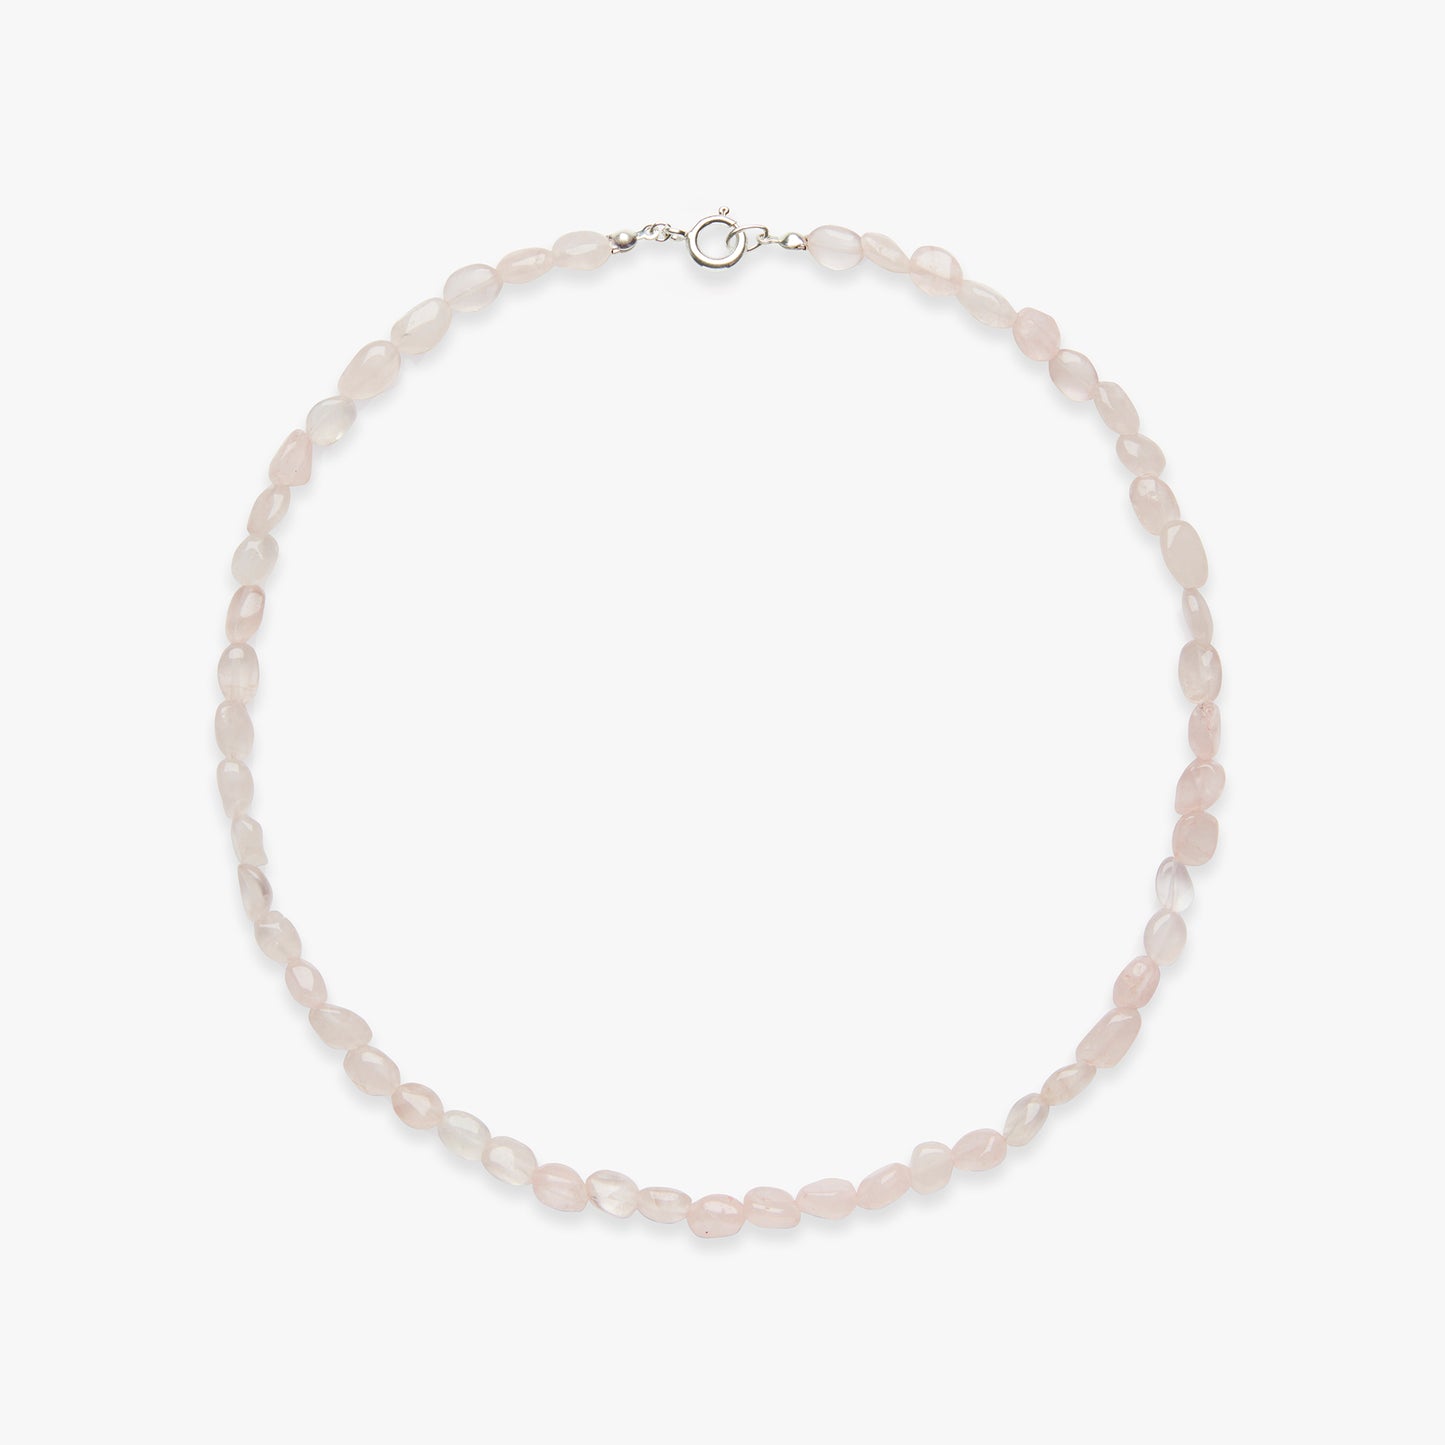 Load image into Gallery viewer, Pixie rose quartz necklace silver
